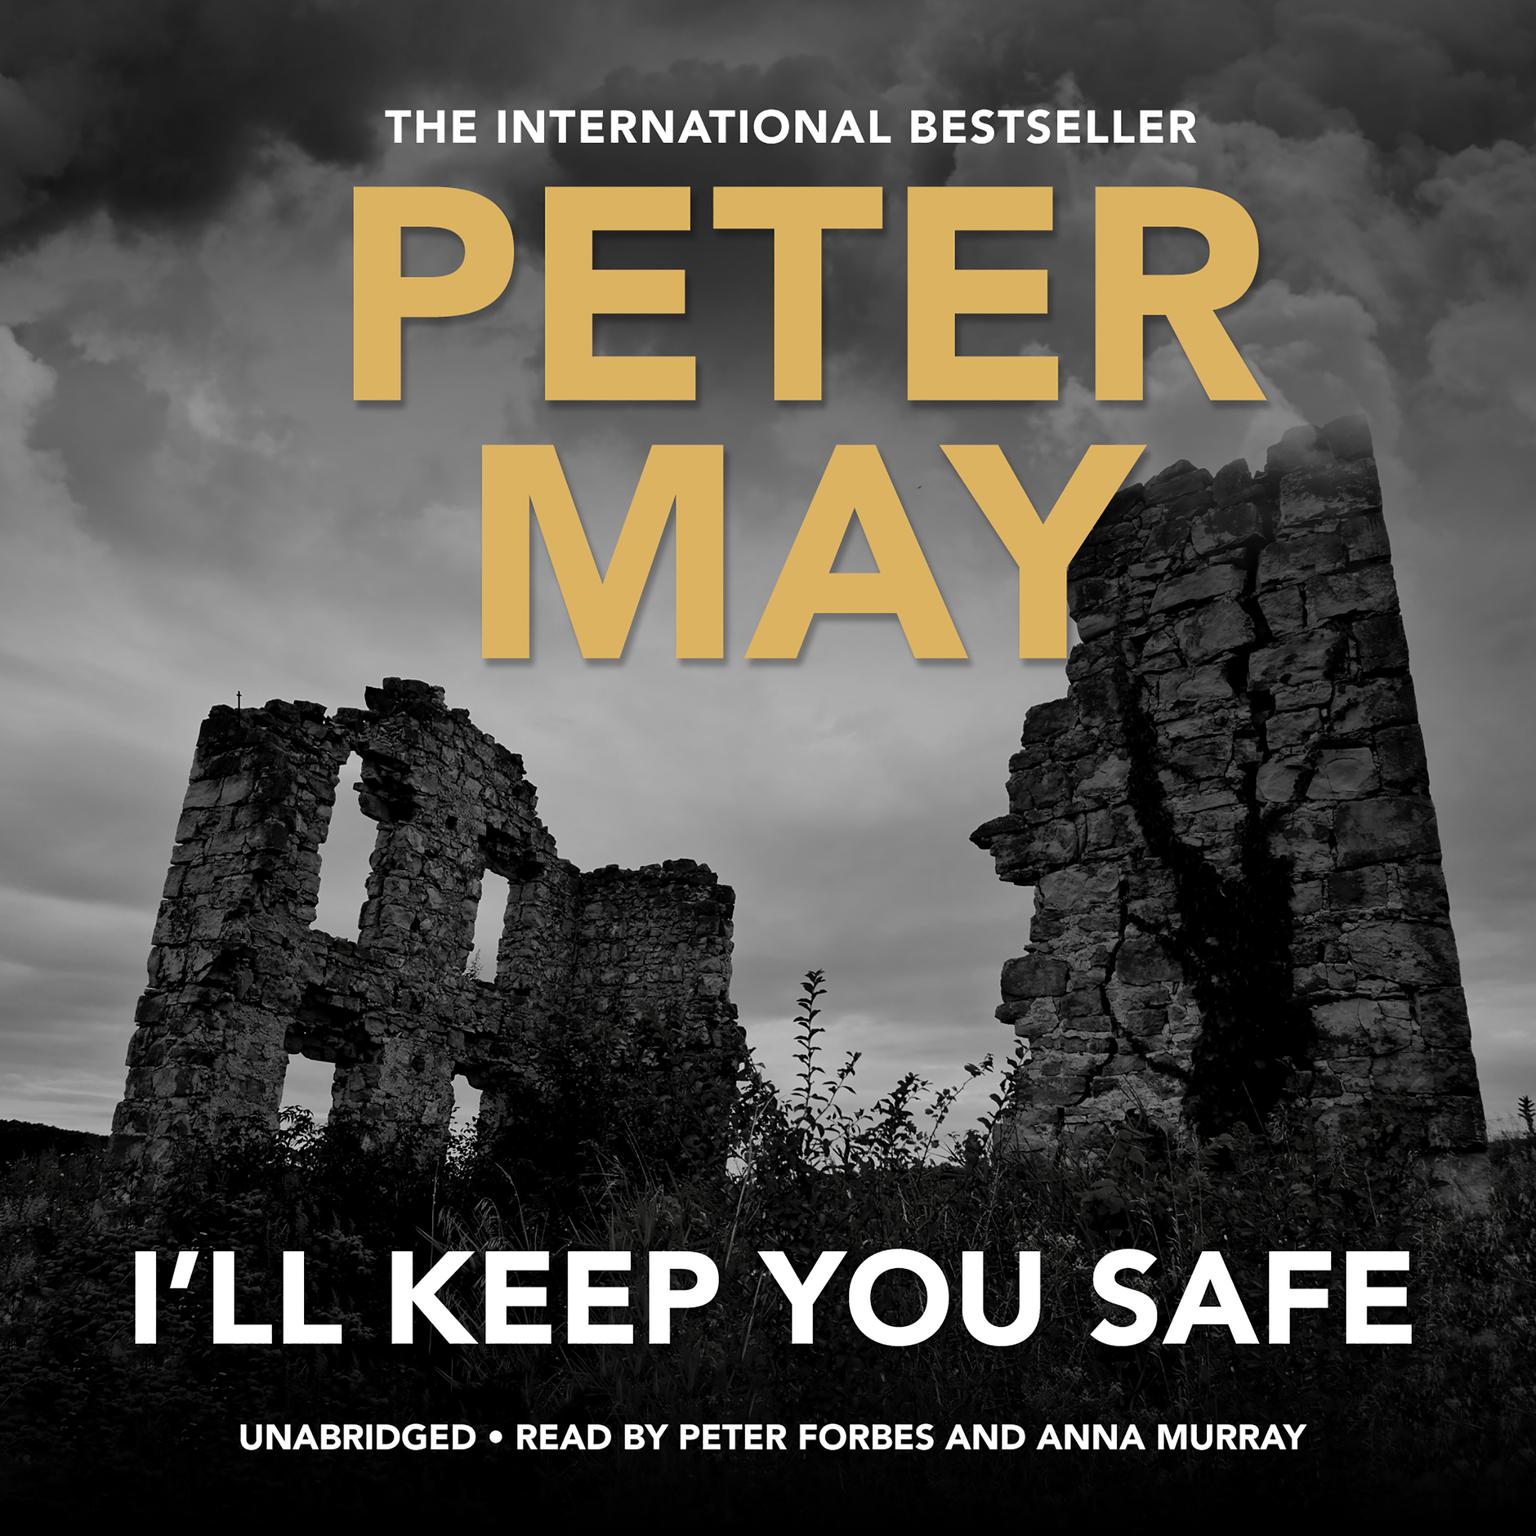 Ill Keep You Safe Audiobook, by Peter May